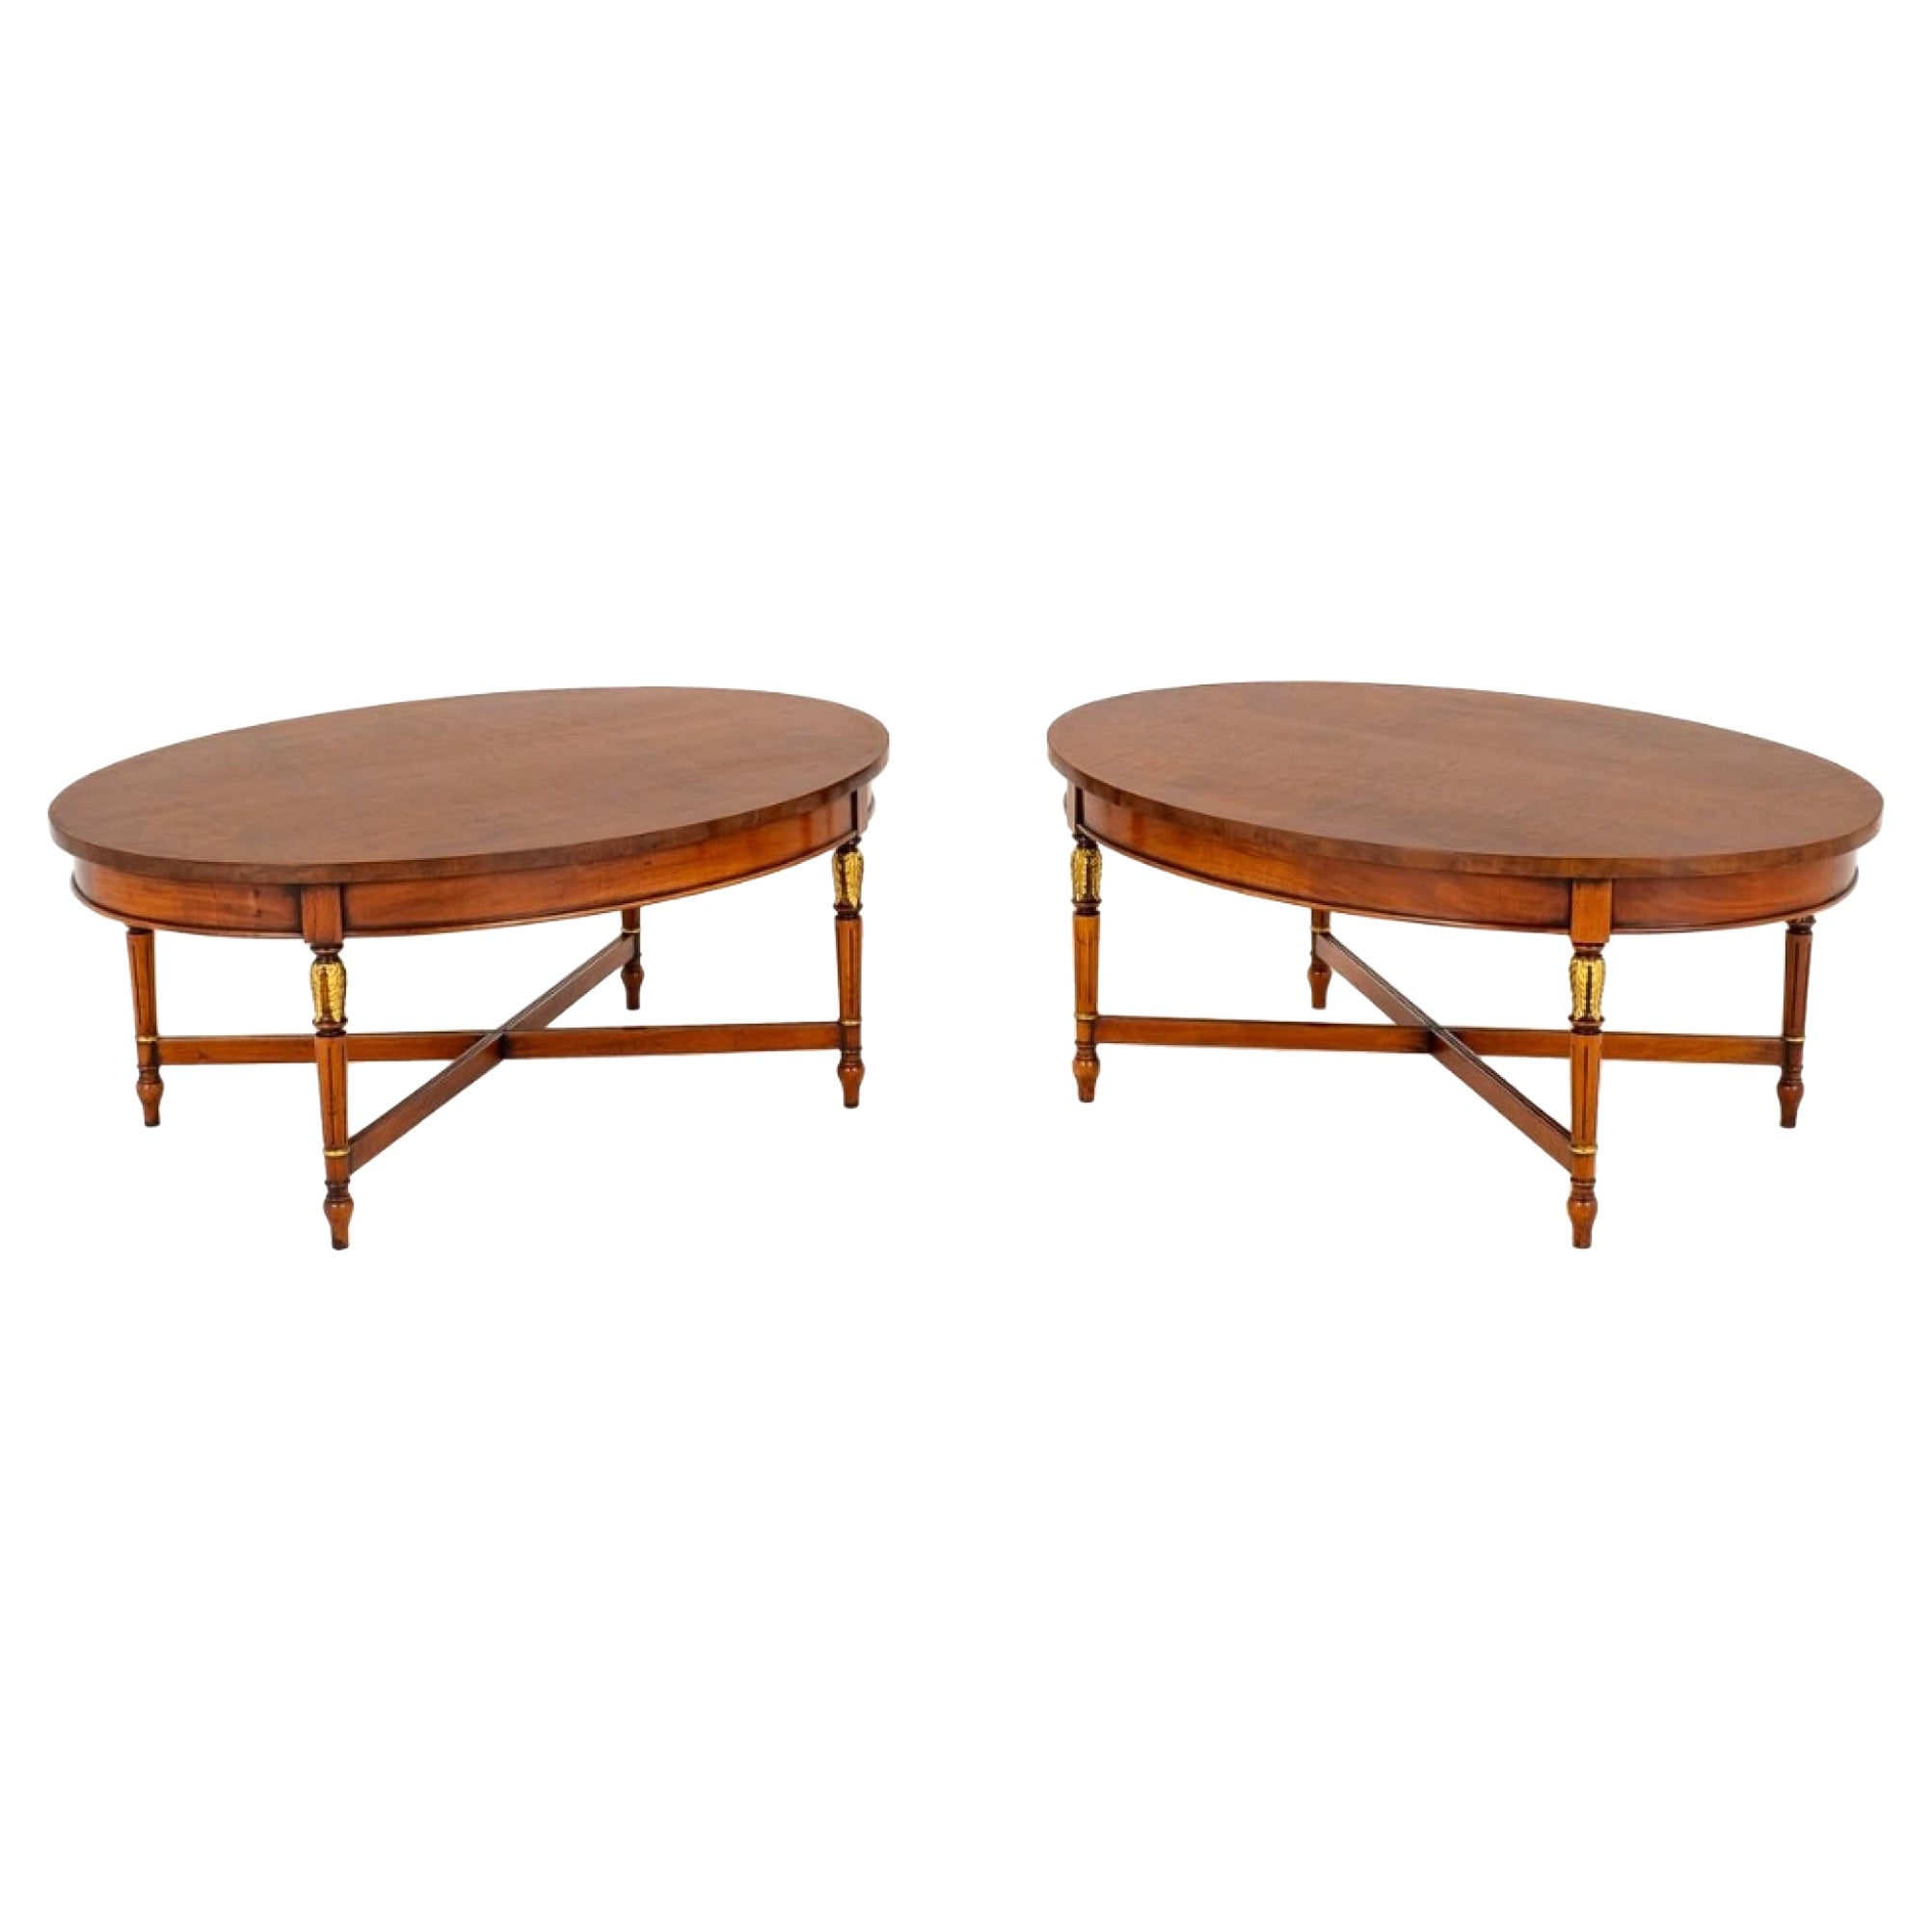 Pair Regency Coffee Tables Walnut Interiors For Sale